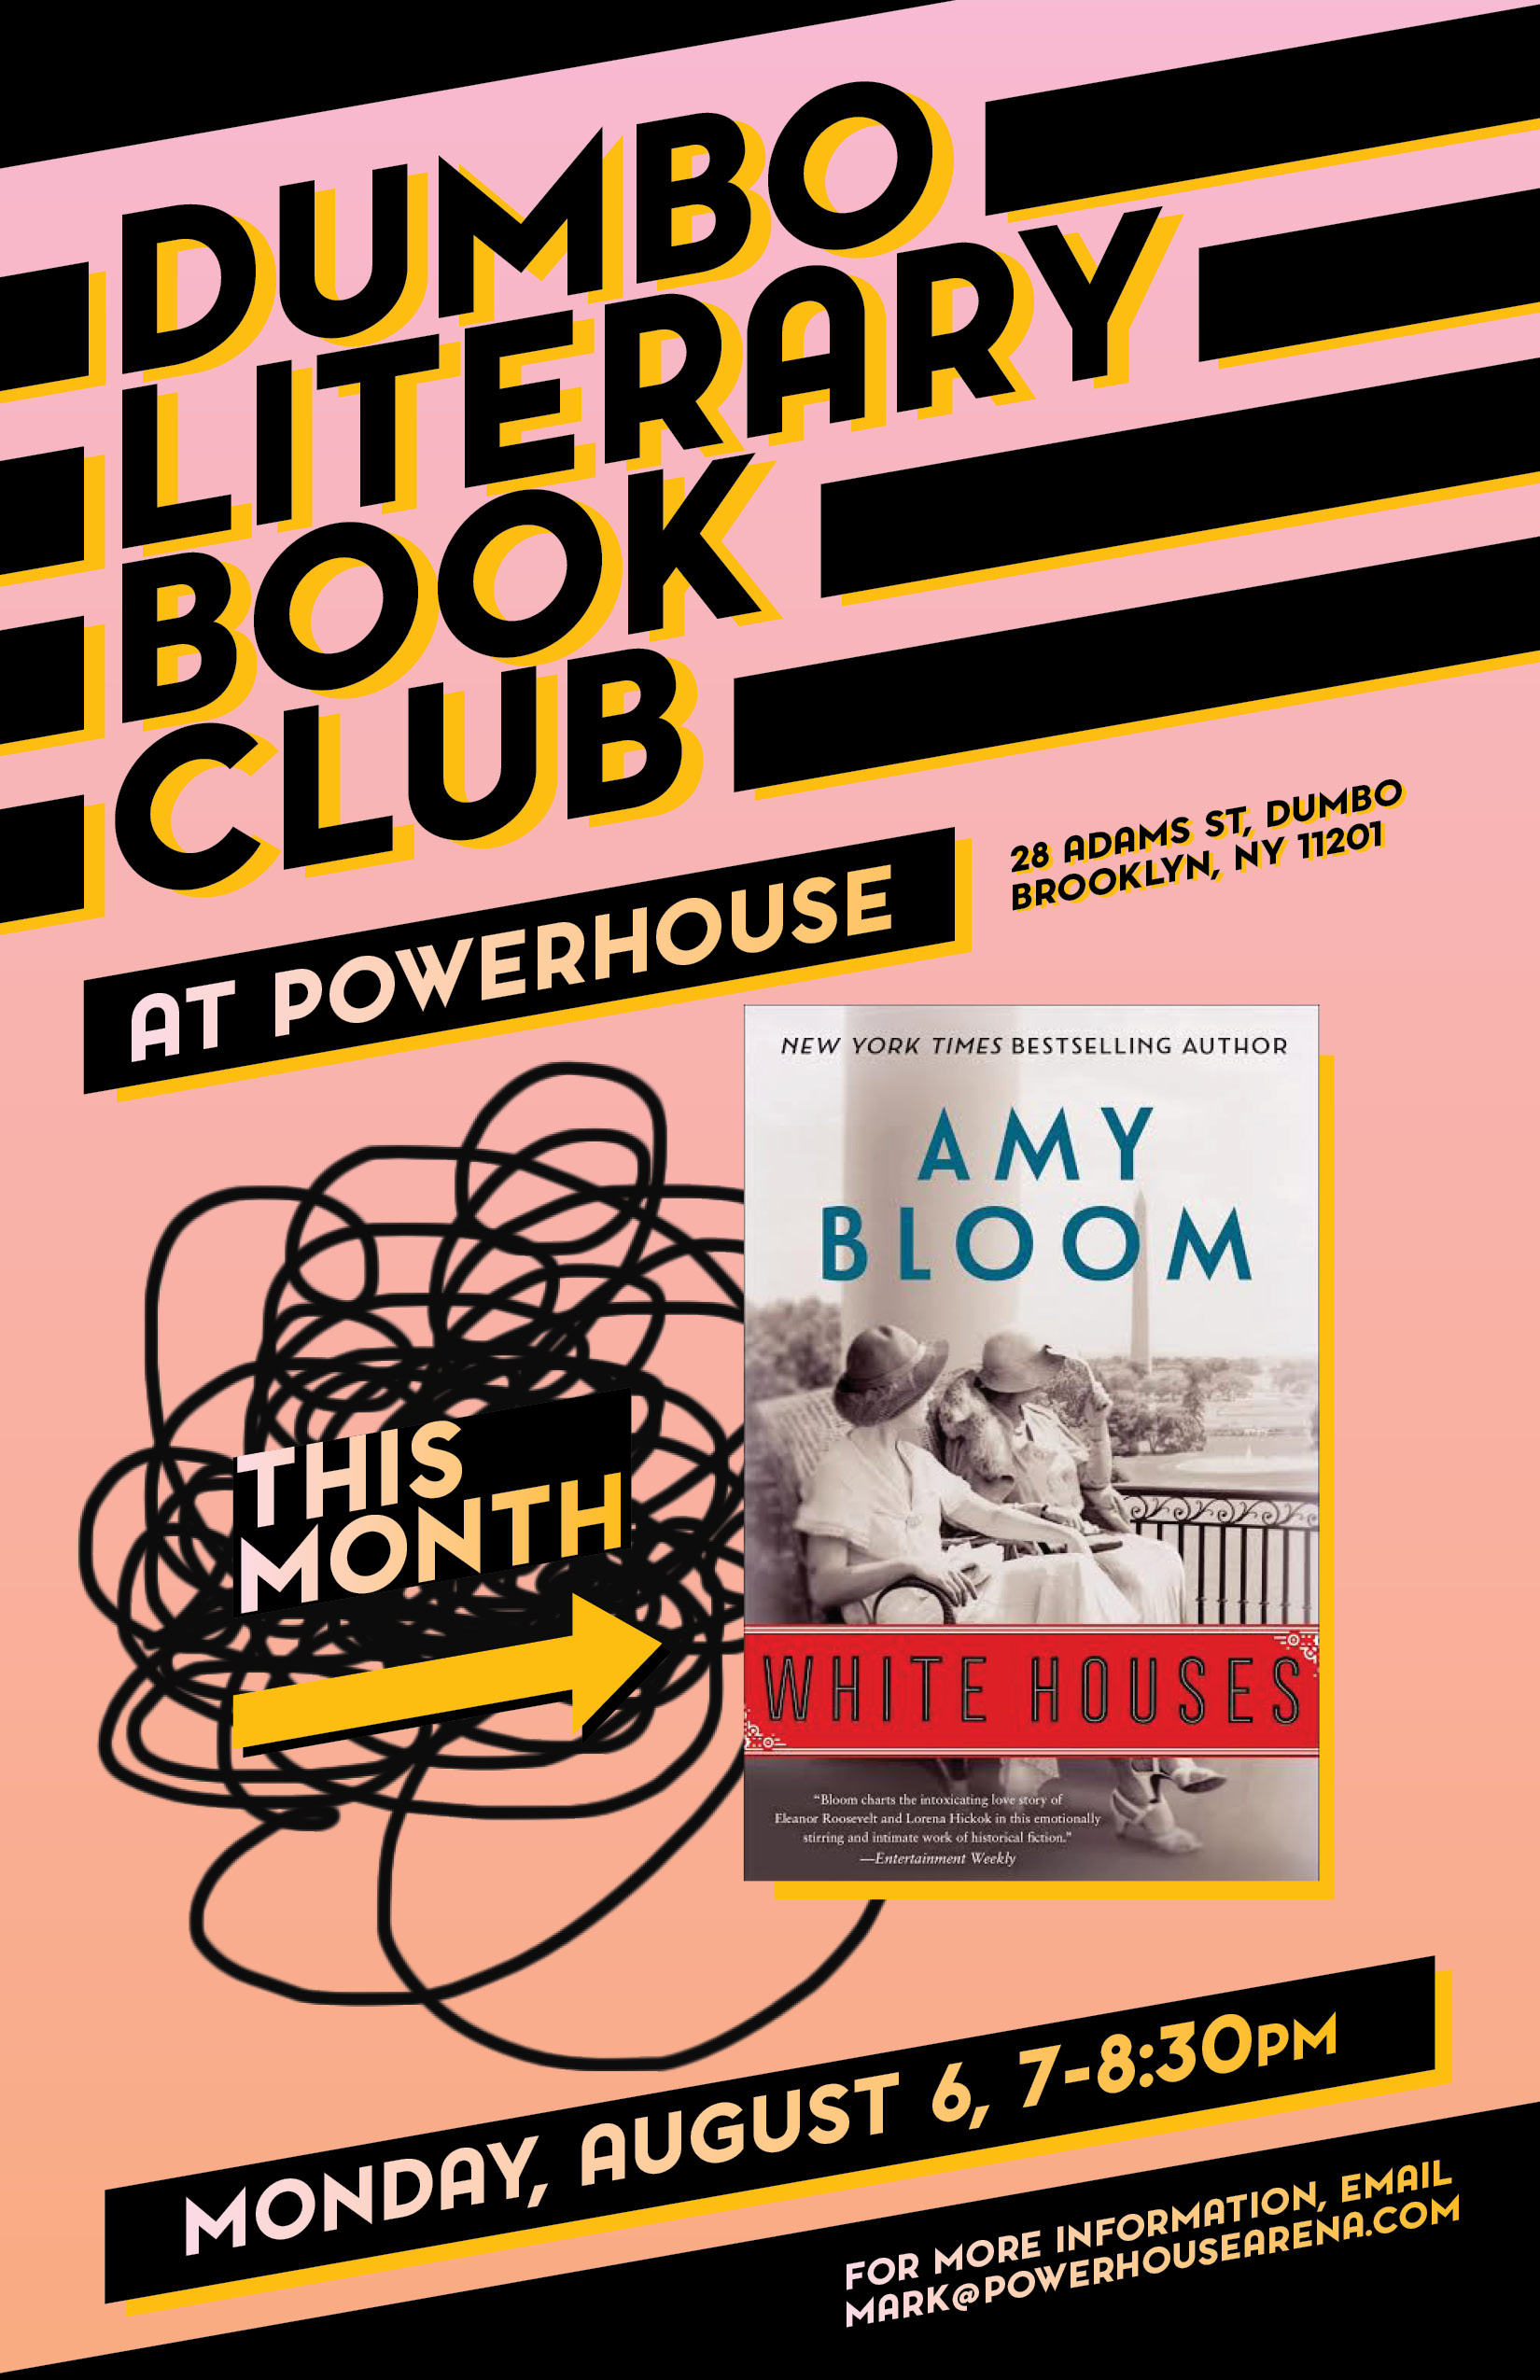 Dumbo Lit Book Club: White Houses by Amy Bloom